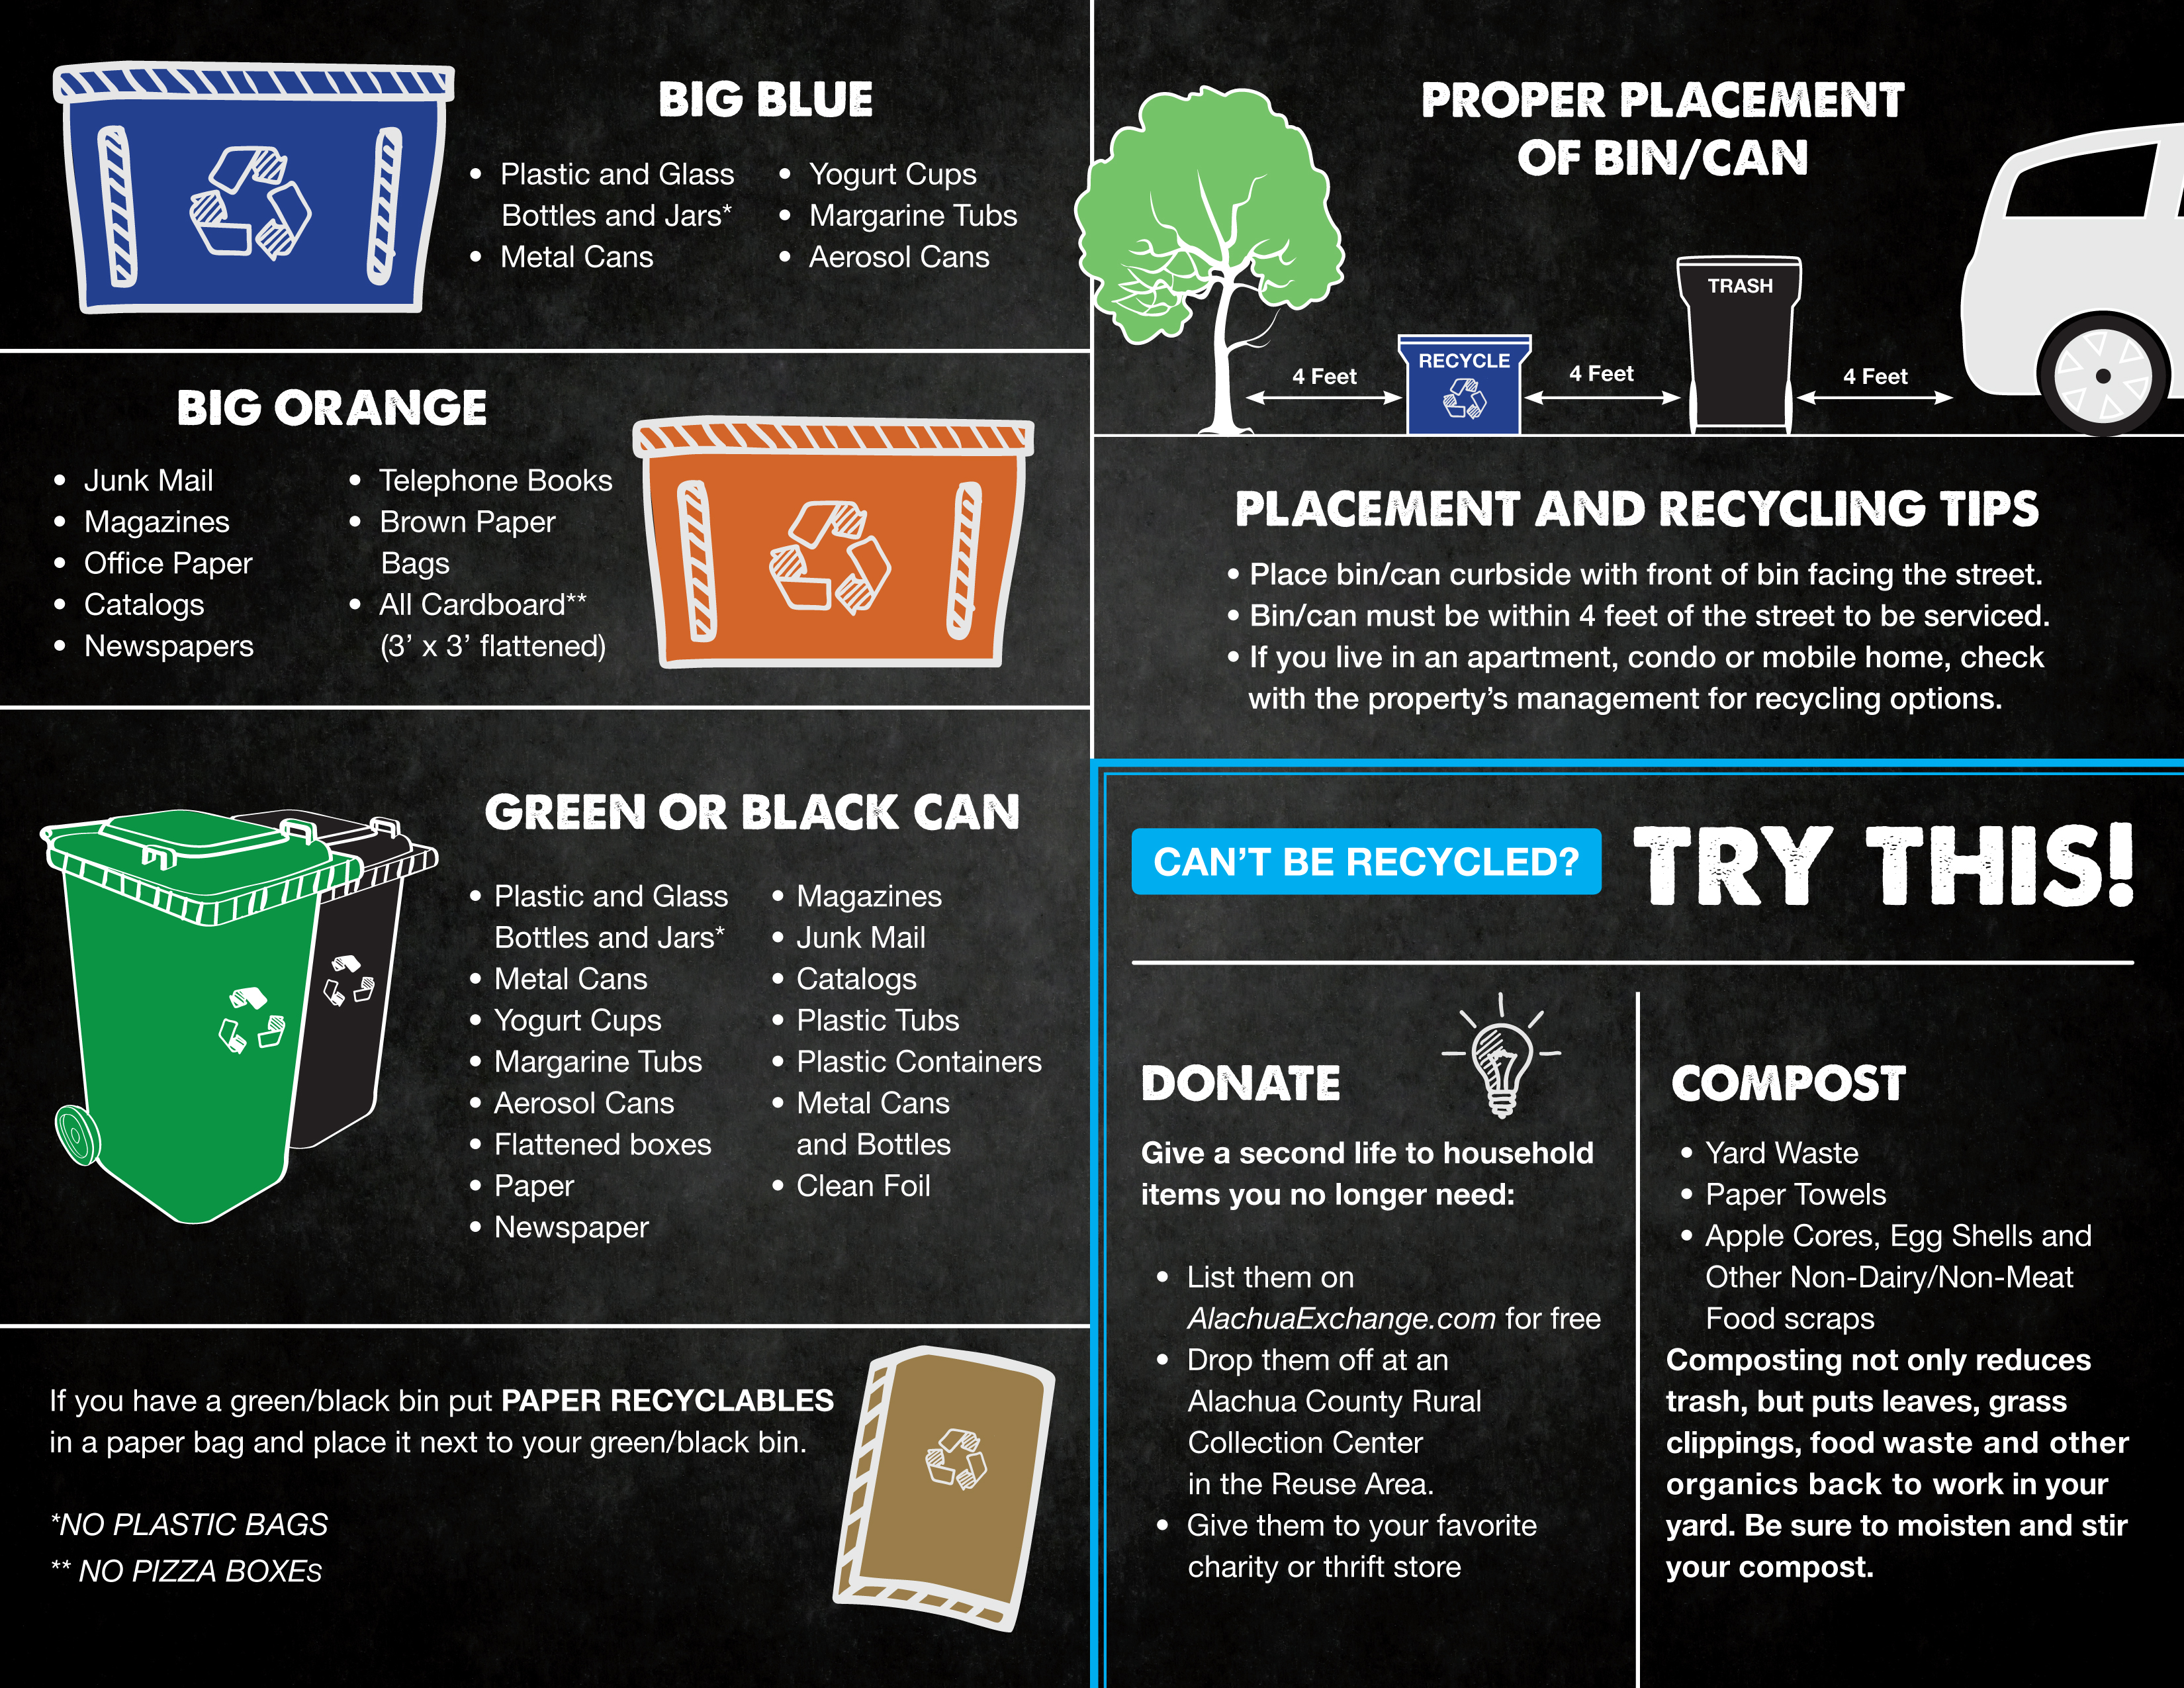 Recycle Right 2018-2.jpg